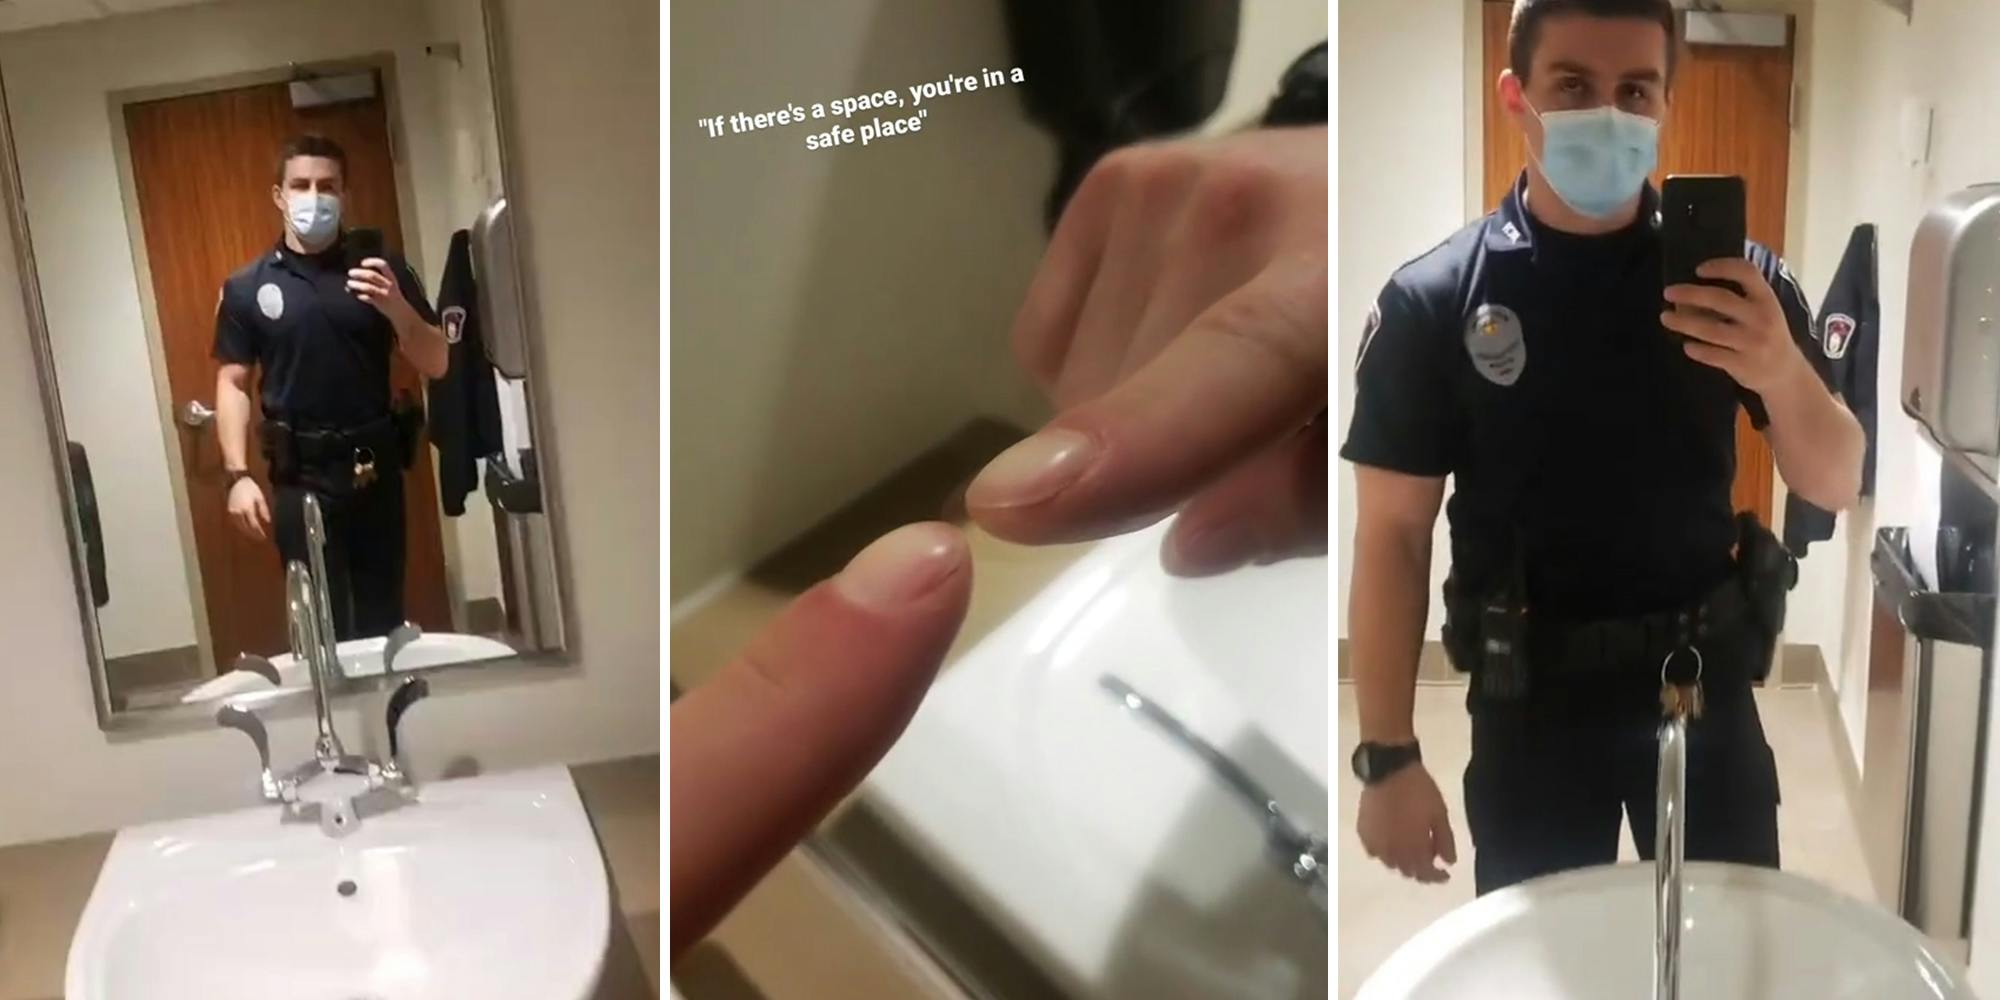 A police officer reveals a two-way mirror detection trick